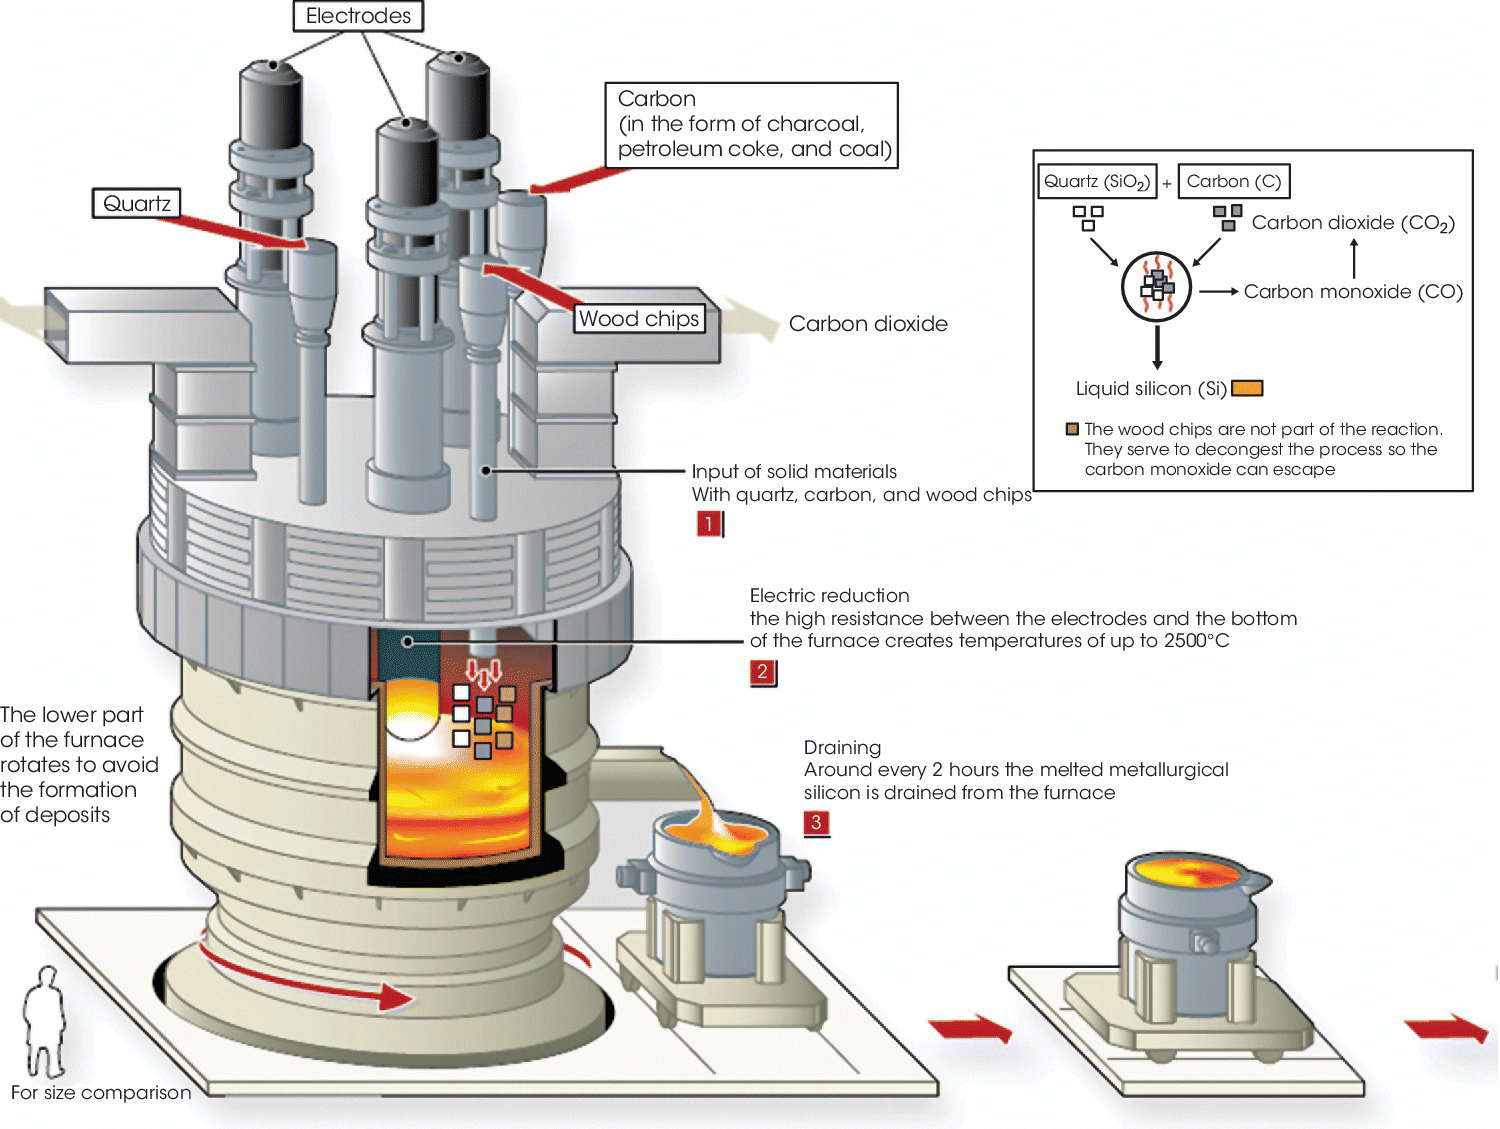 Schematic of electric arc reduction furnace for manufacturing metallurgical silicon, with arrows labeled electrodes, woodchips, carbon, quartz, and carbon dioxide (outward arrows).